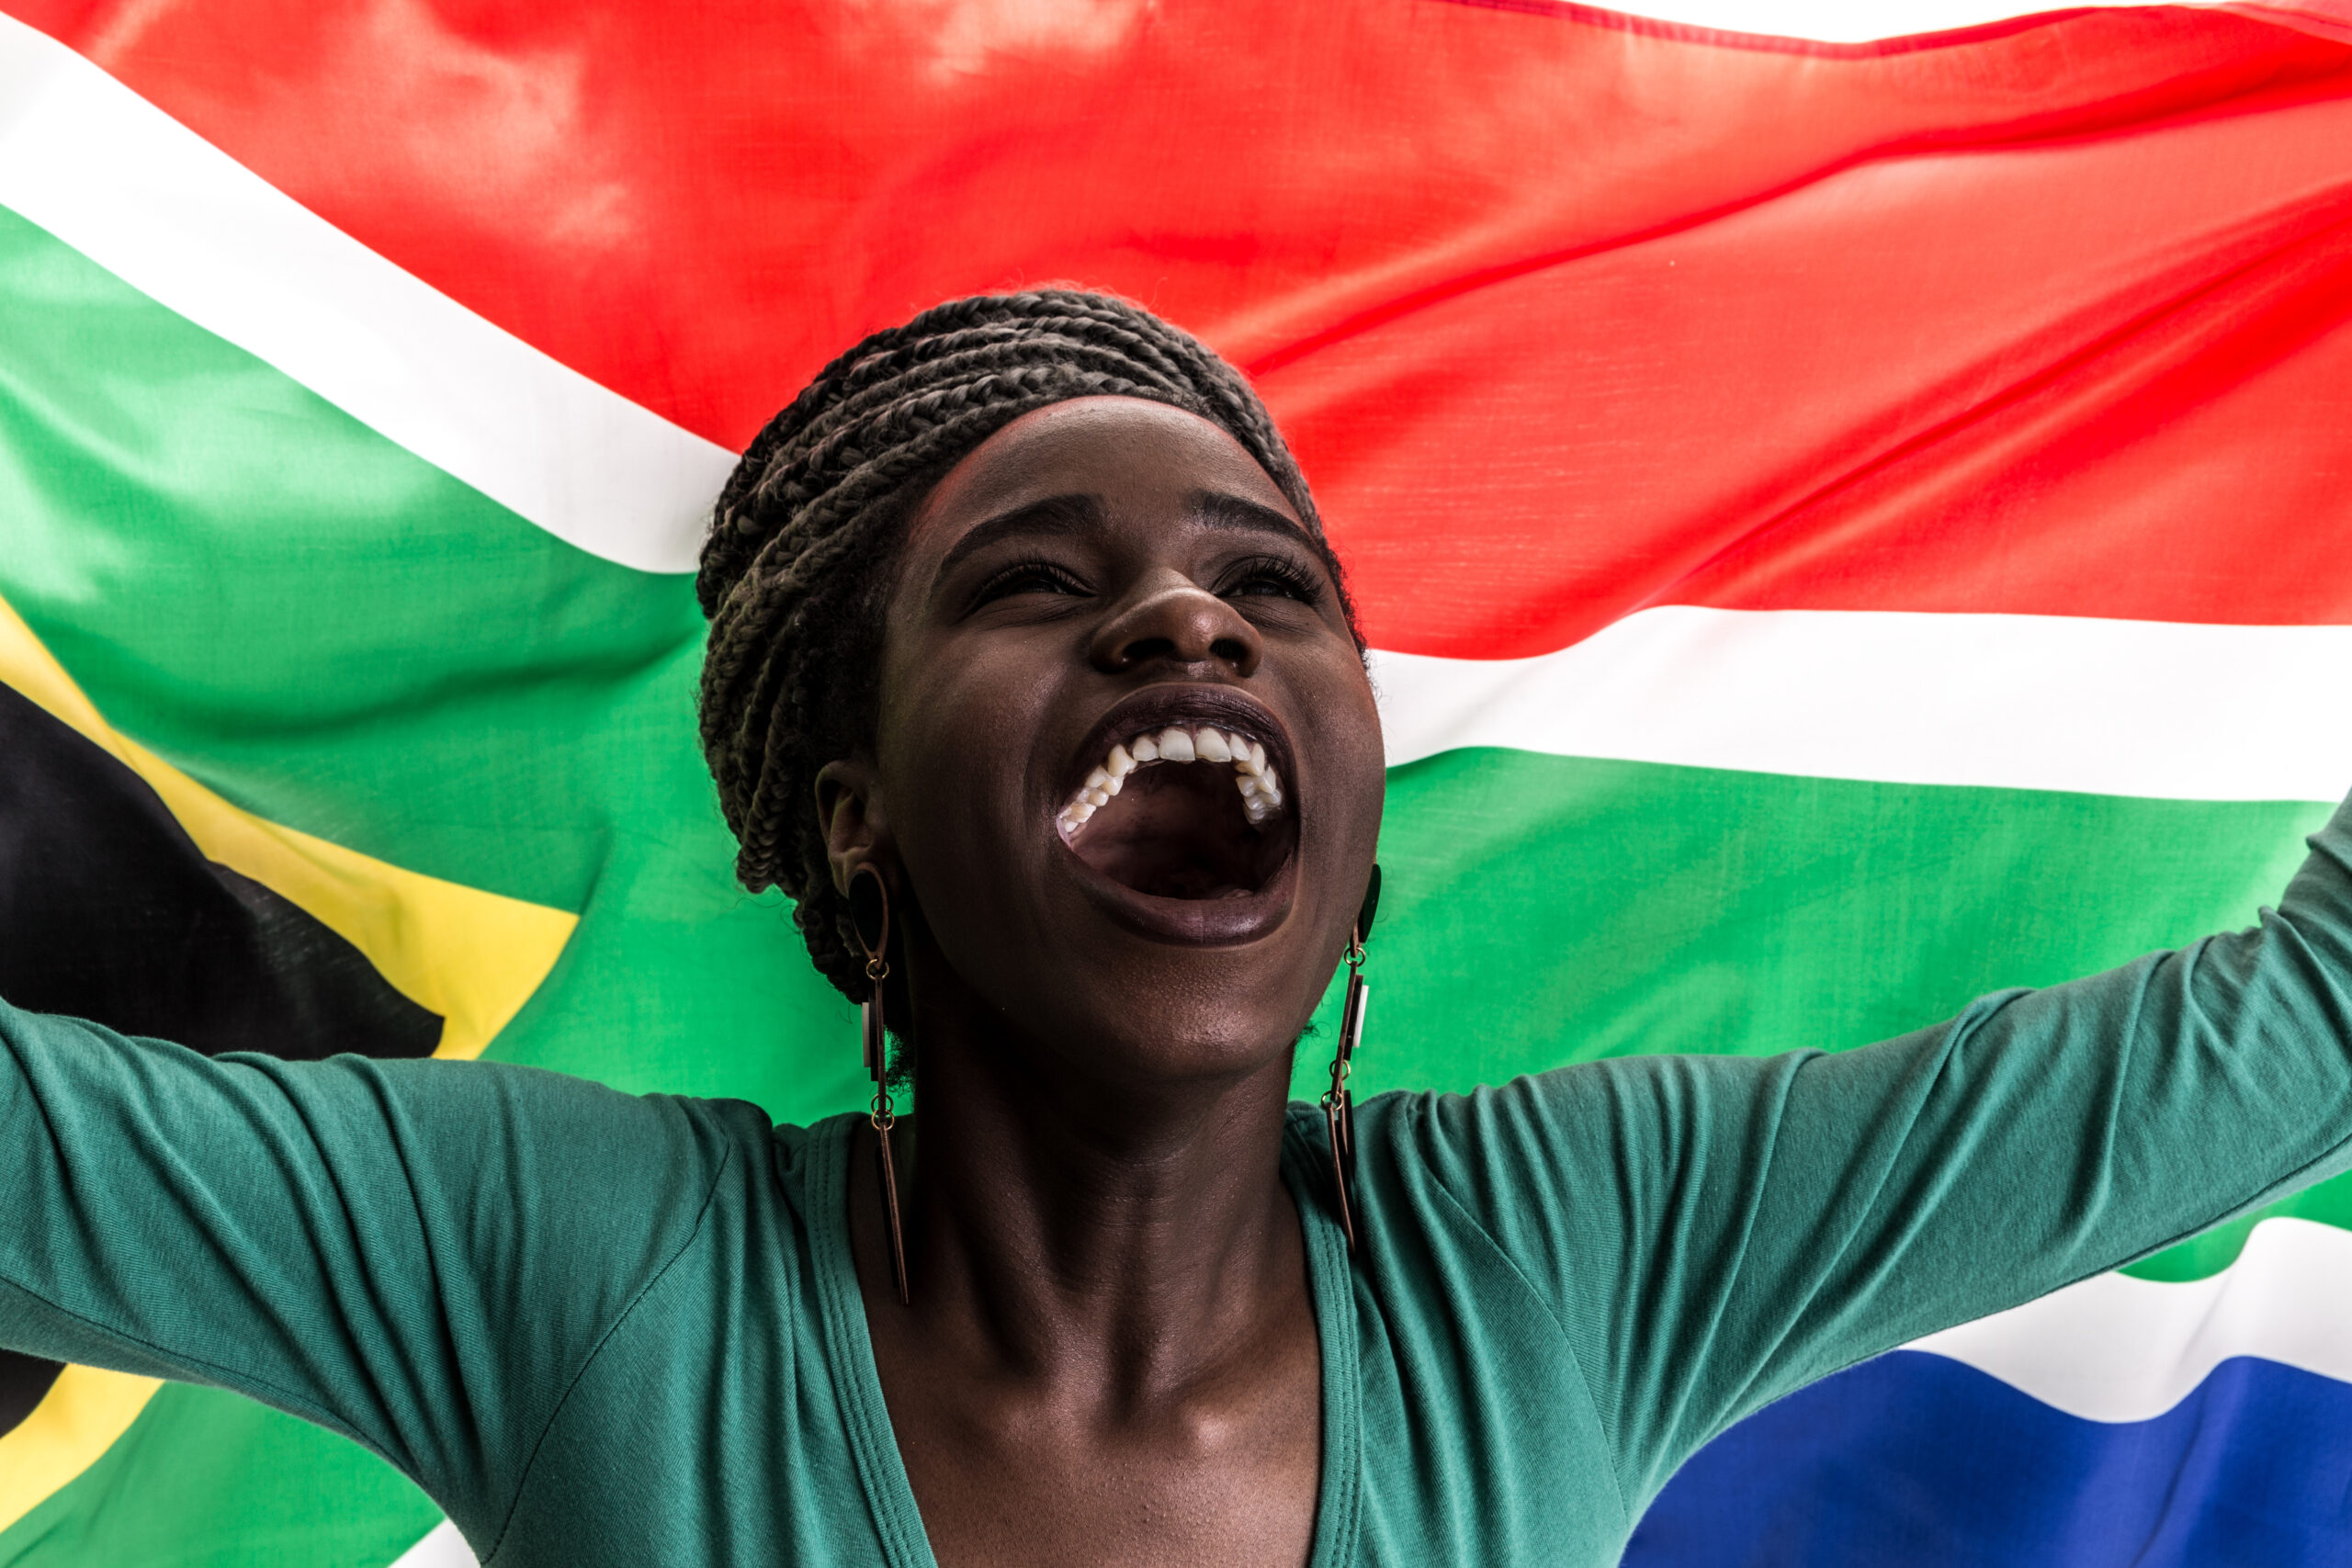 South African fan celebrating with the national flag